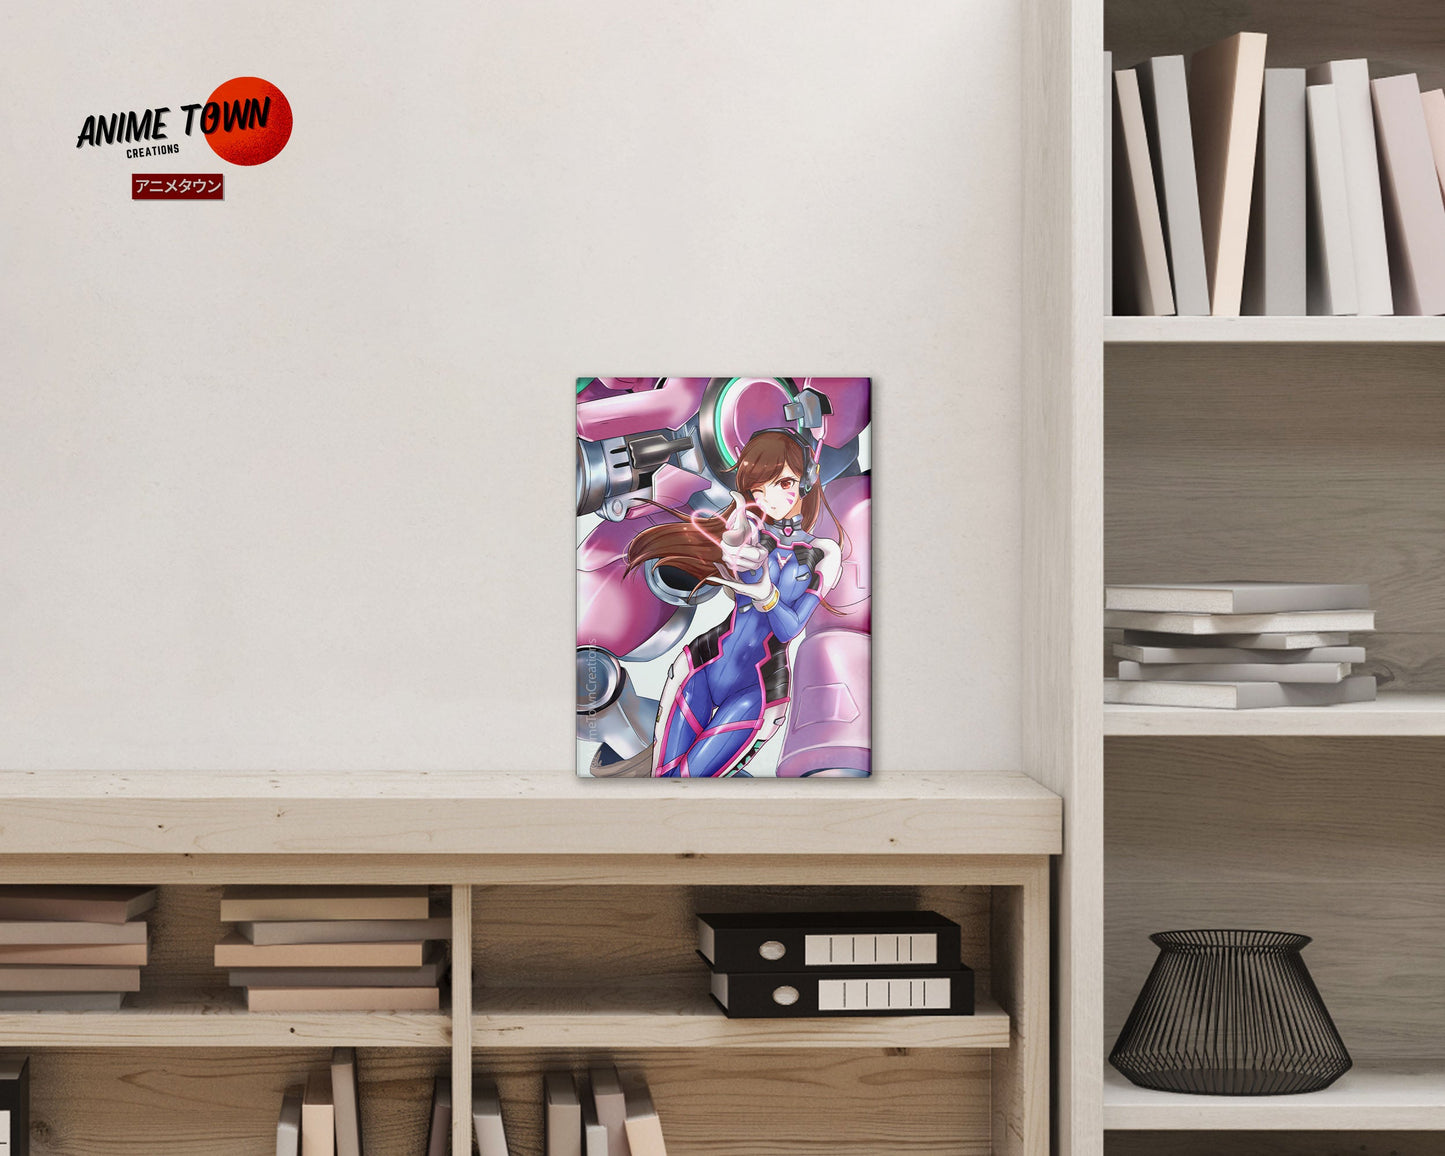 Anime Town Creations Metal Poster Overwatch D.Va 5" x 7" Home Goods - Anime Overwatch Metal Poster